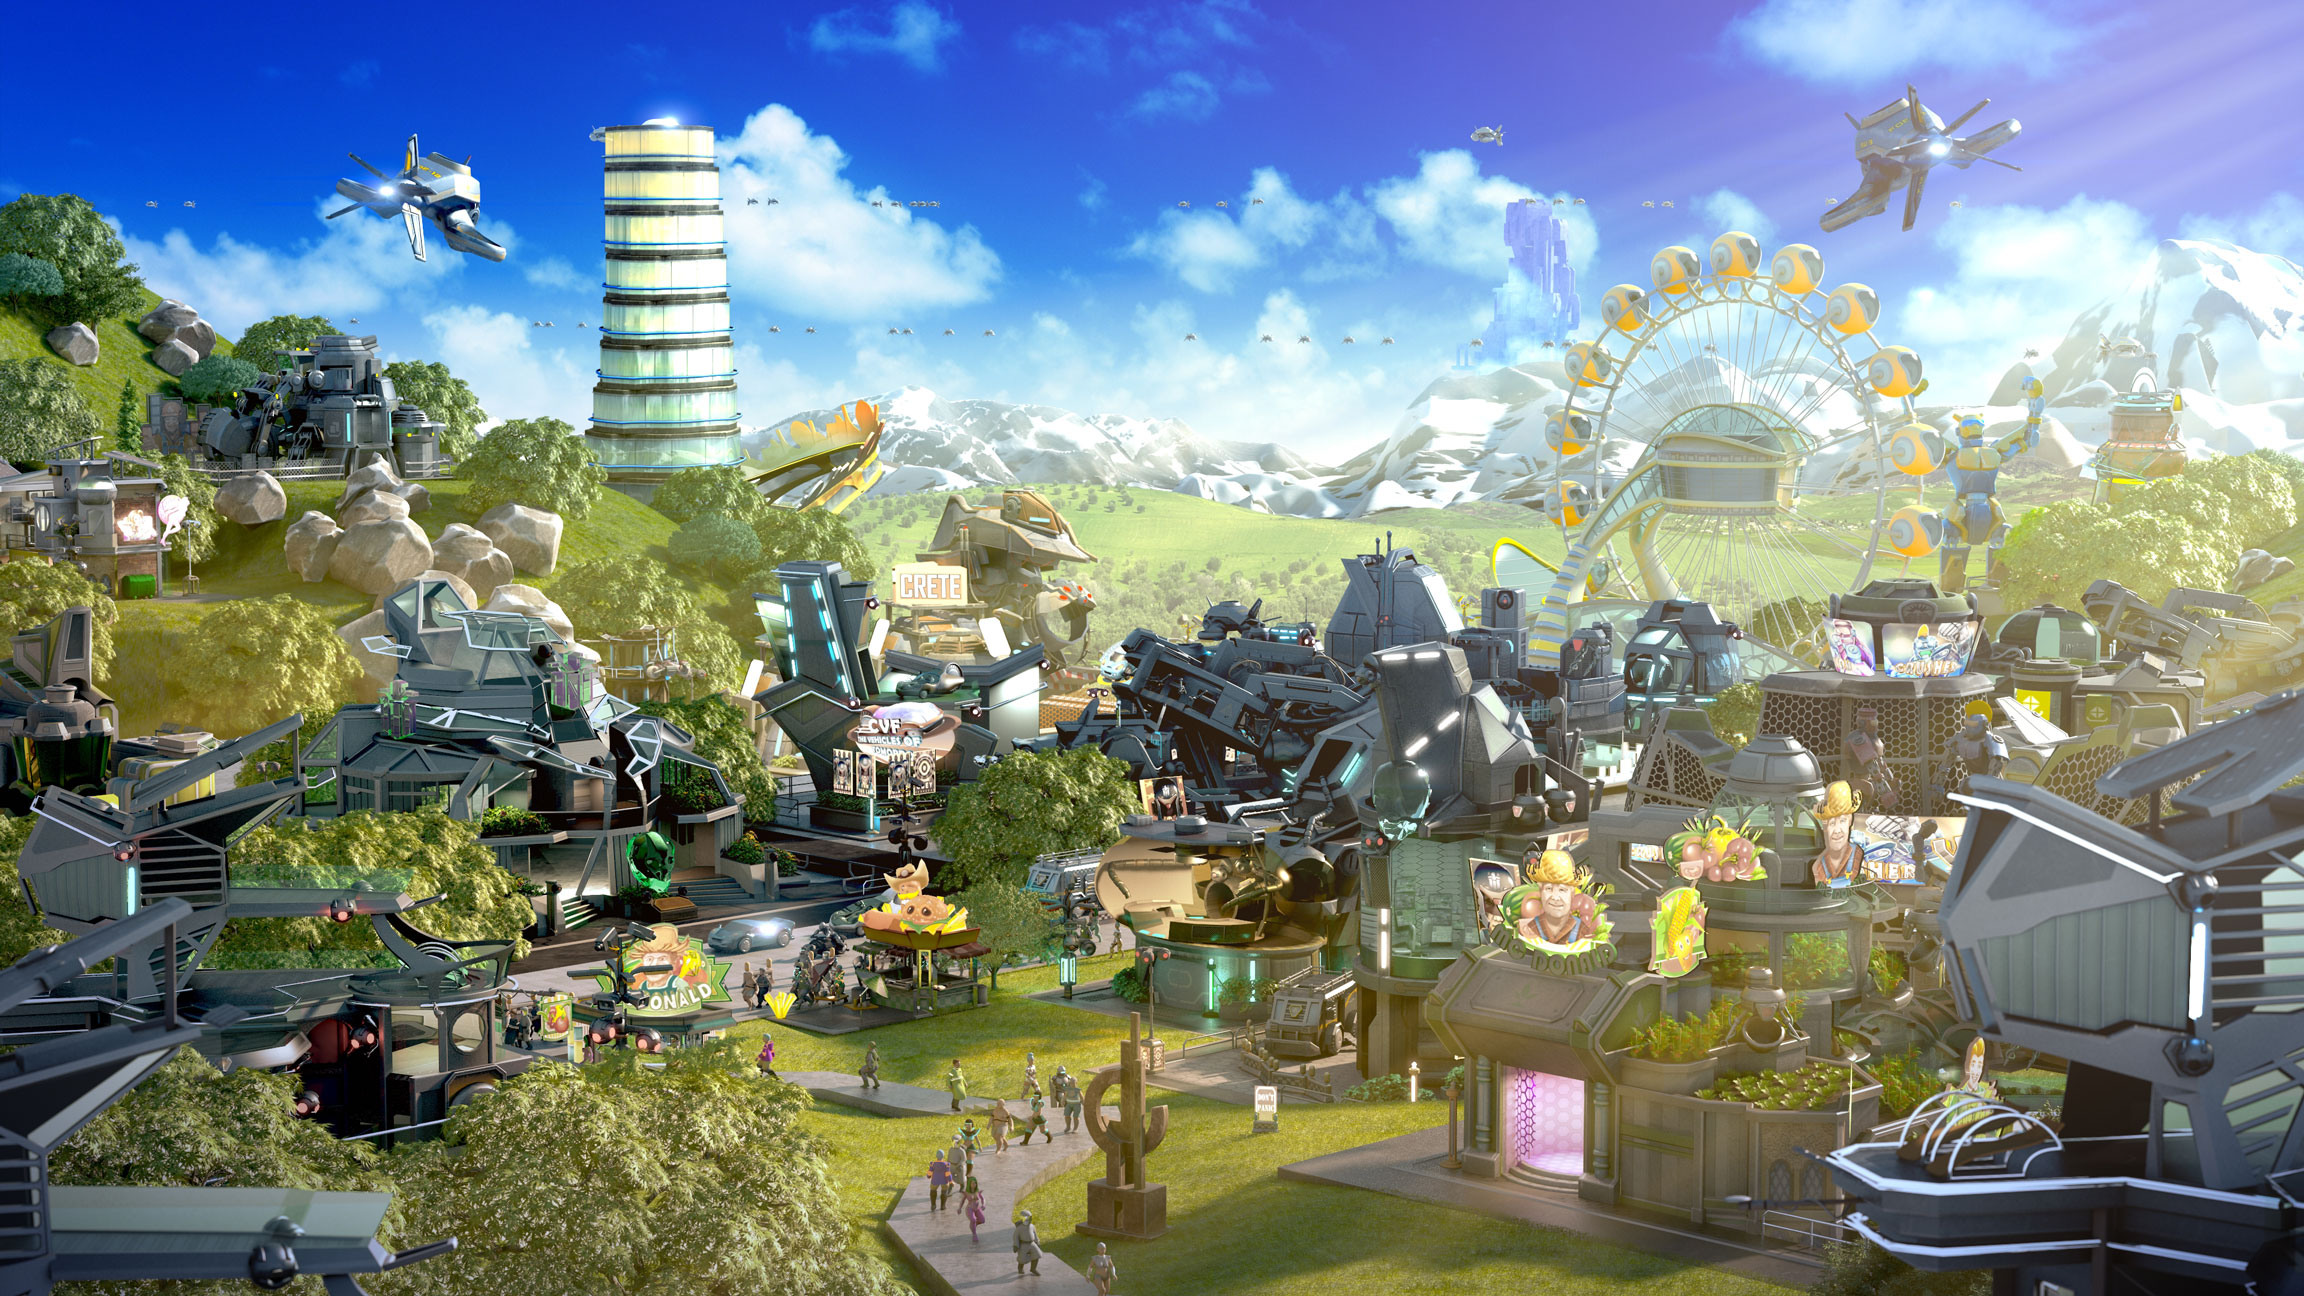 Video Games Forge Of Empires City Futuristic Futuristic City Spaceship Tower Sky Clouds Sunlight Vid 2304x1296